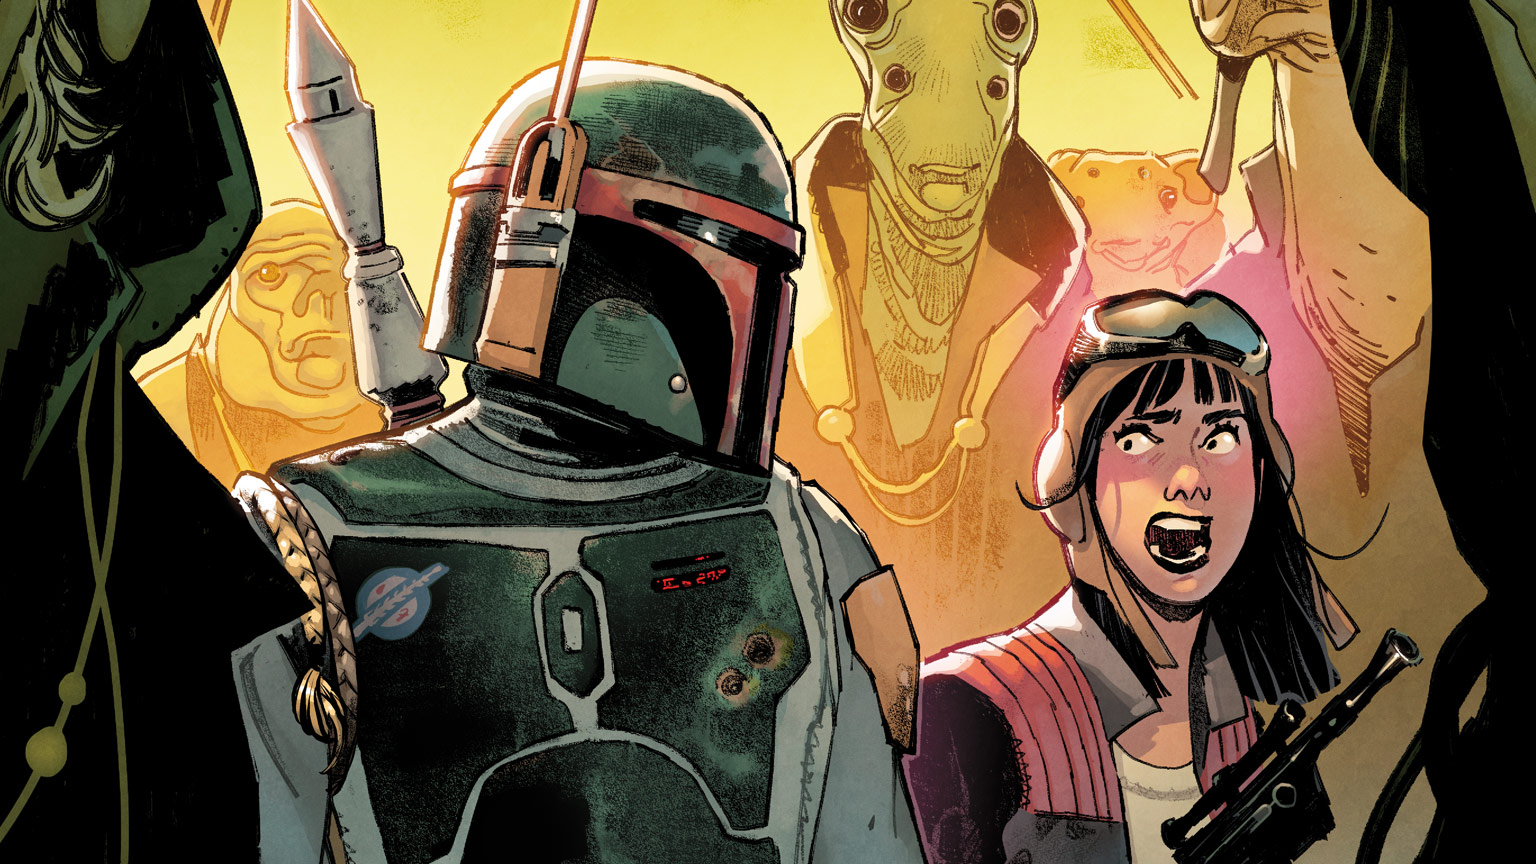 The War of the Bounty Hunters Erupts in Marvel’s July 2021 Star Wars Comics – Exclusive